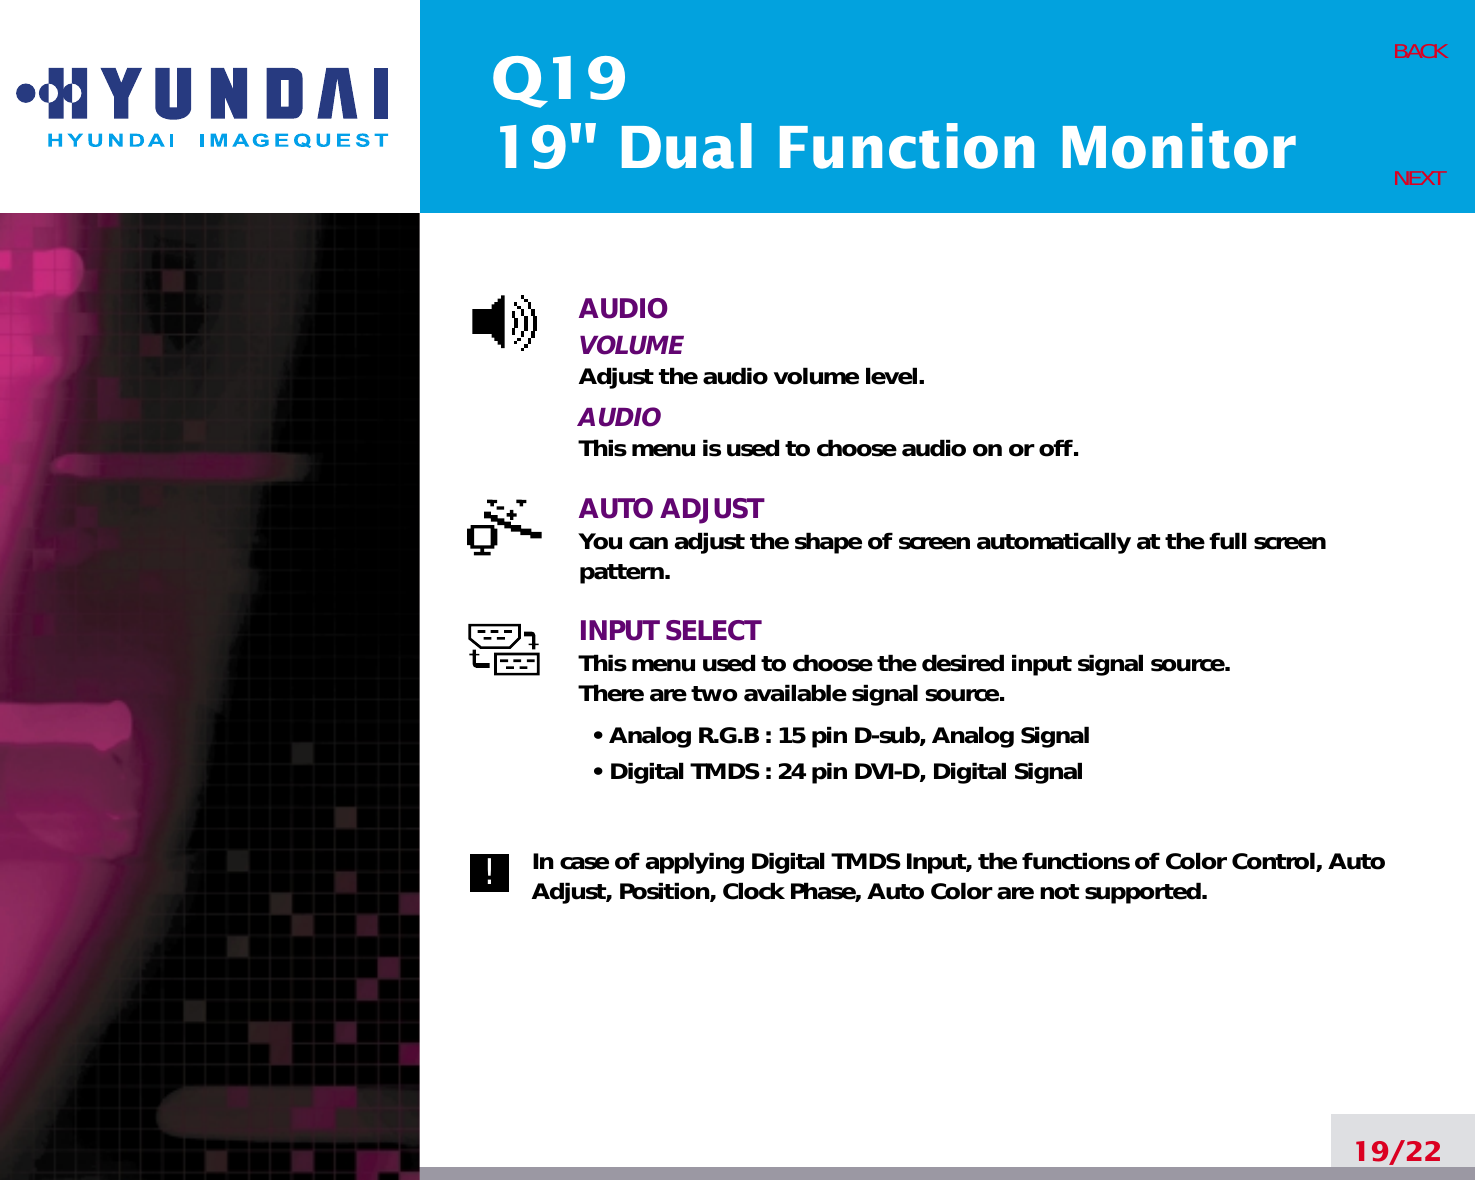 Q1919&quot; Dual Function MonitorAUDIOVOLUMEAdjust the audio volume level.AUDIOThis menu is used to choose audio on or off.AUTO ADJUSTYou can adjust the shape of screen automatically at the full screenpattern.INPUT SELECTThis menu used to choose the desired input signal source.There are two available signal source.• Analog R.G.B : 15 pin D-sub, Analog Signal• Digital TMDS : 24 pin DVI-D, Digital SignalIn case of applying Digital TMDS Input, the functions of Color Control, AutoAdjust, Position, Clock Phase, Auto Color are not supported.19/22BACKNEXT!